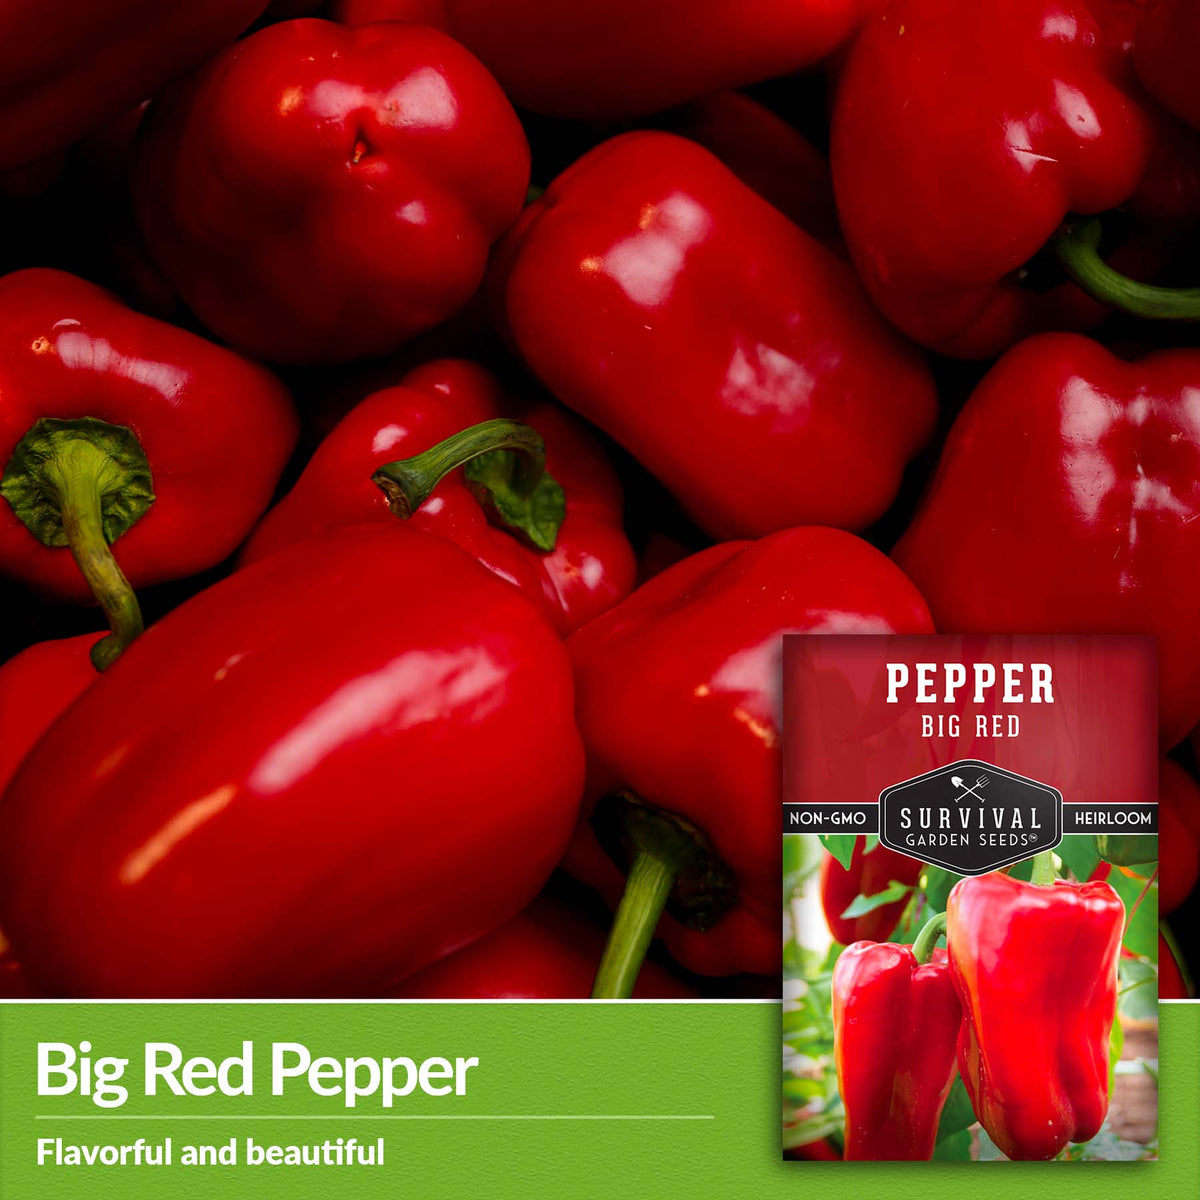 Big Red Peppers are flavorful and beautiful